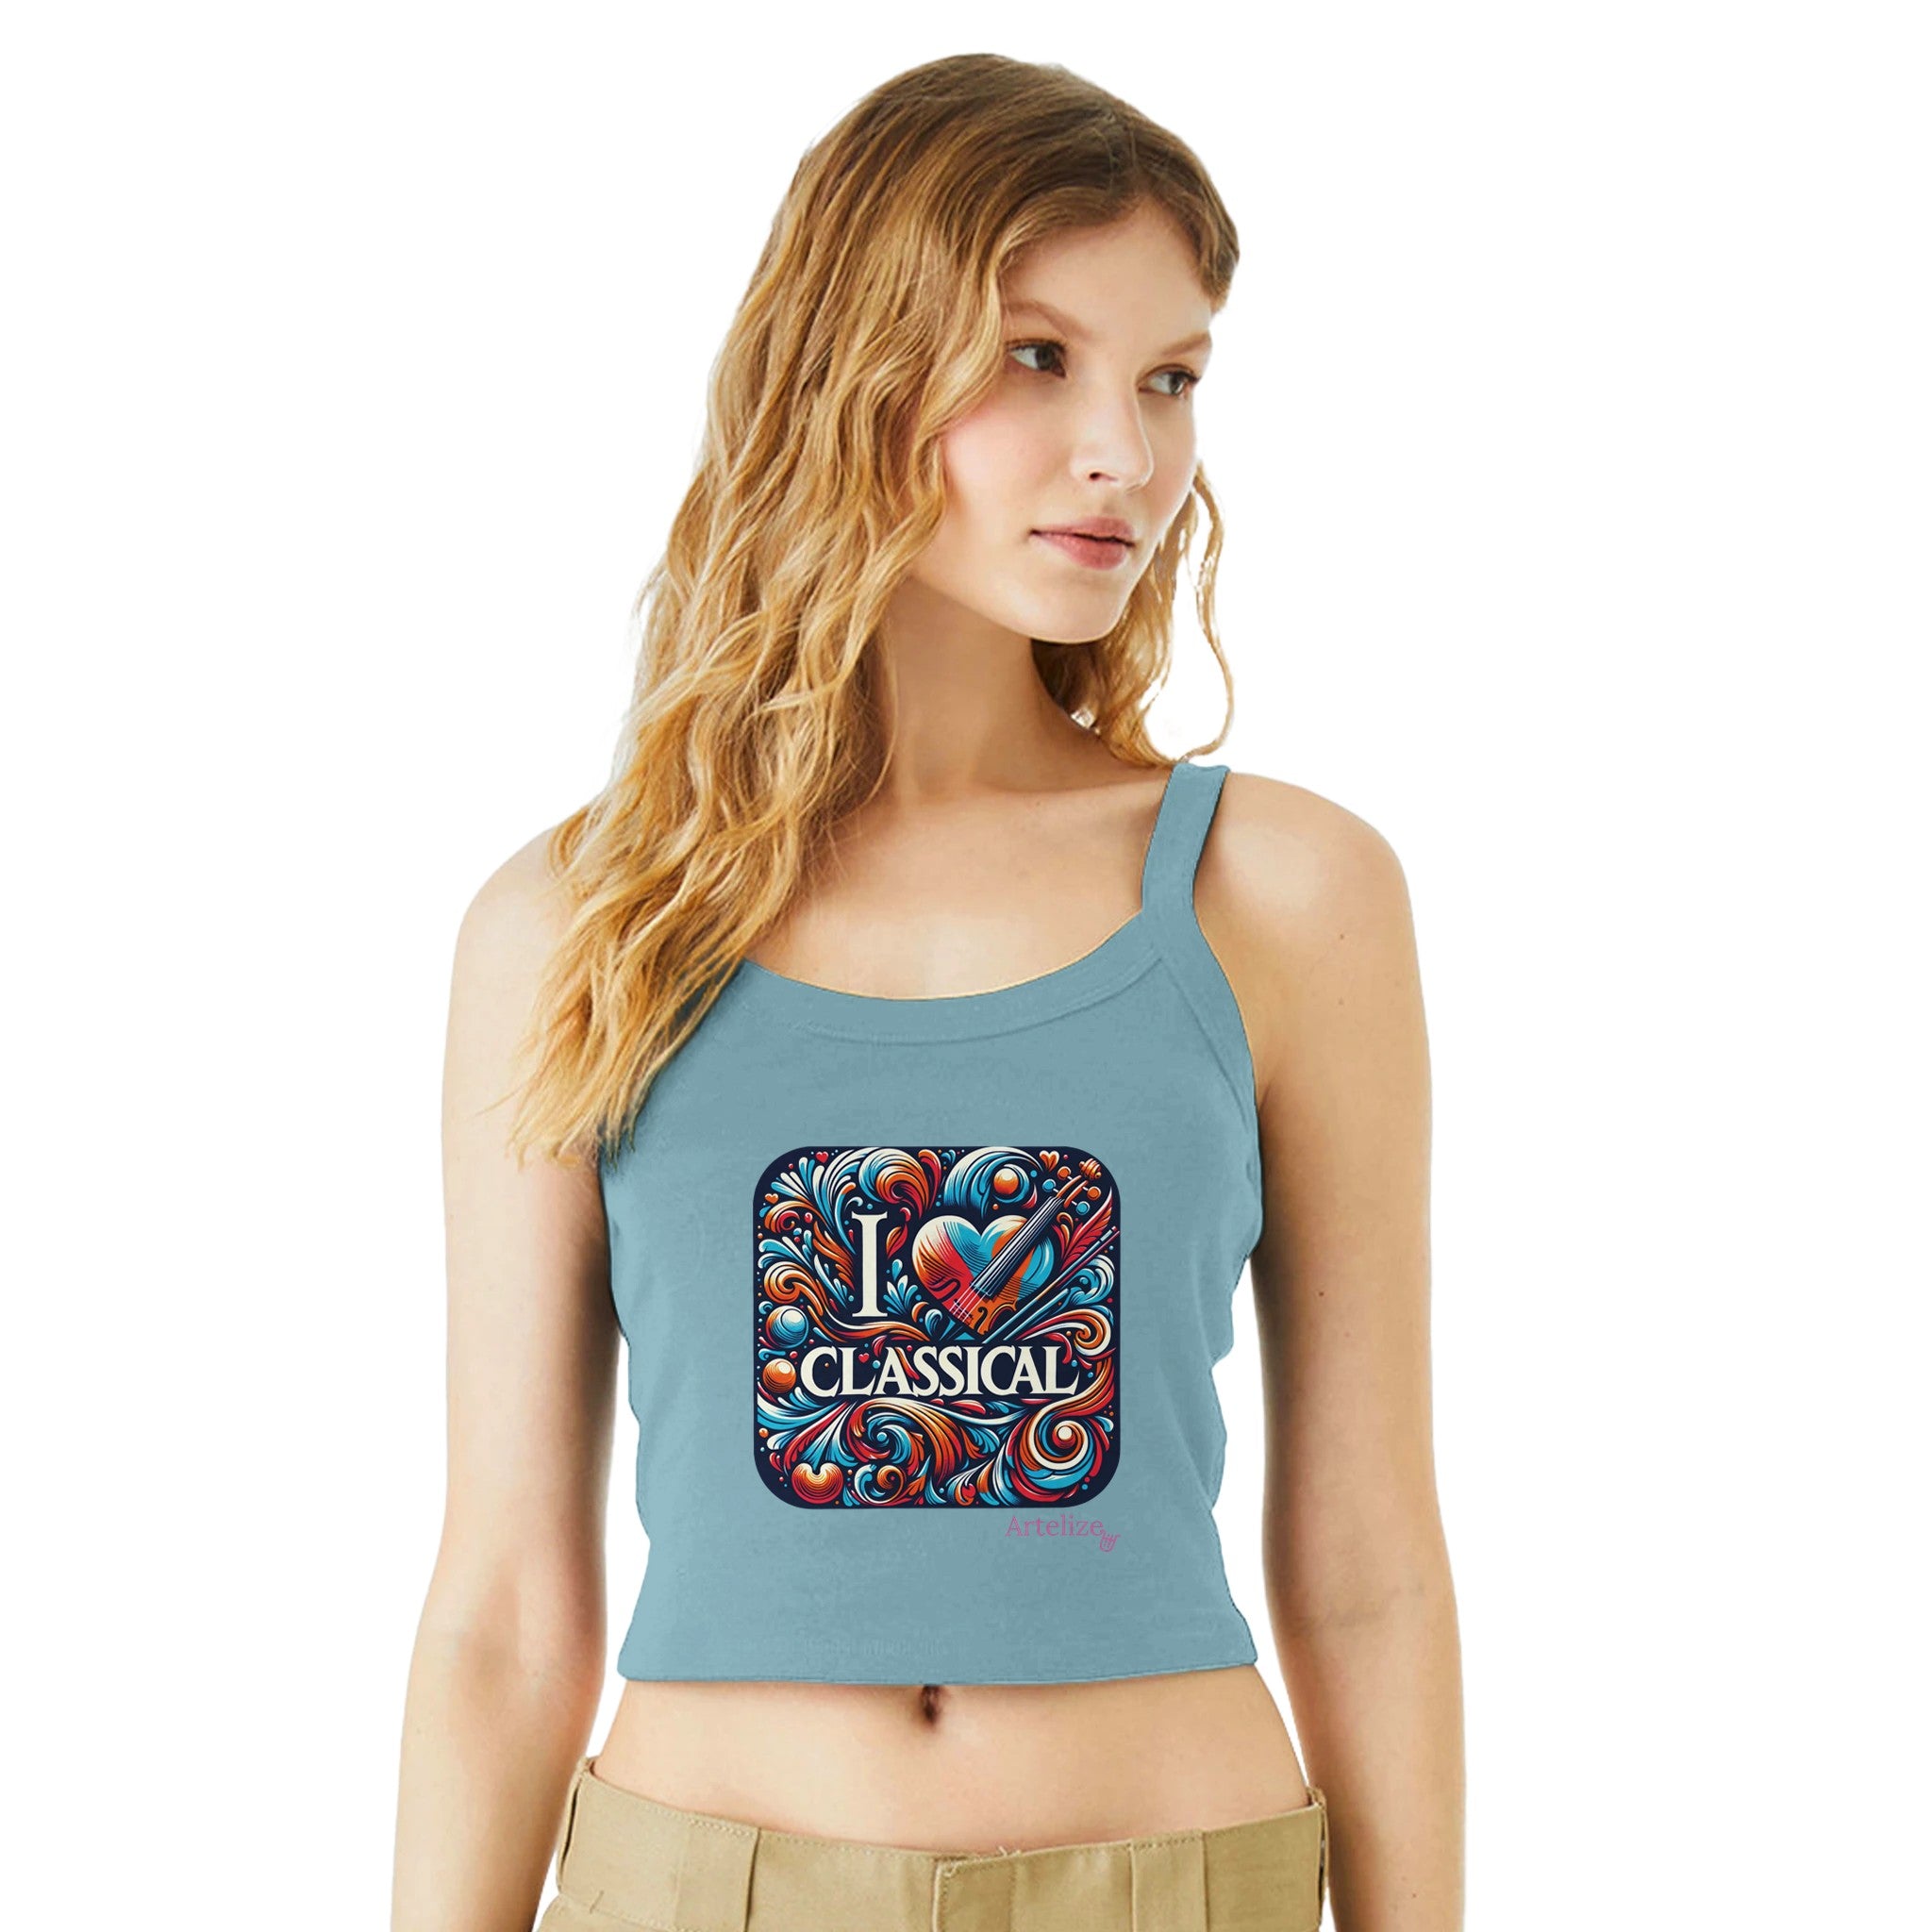 "I LOVE CLASSICAL" Women's Micro Ribbed Scoop Tank | Bella + Canvas 1012BE